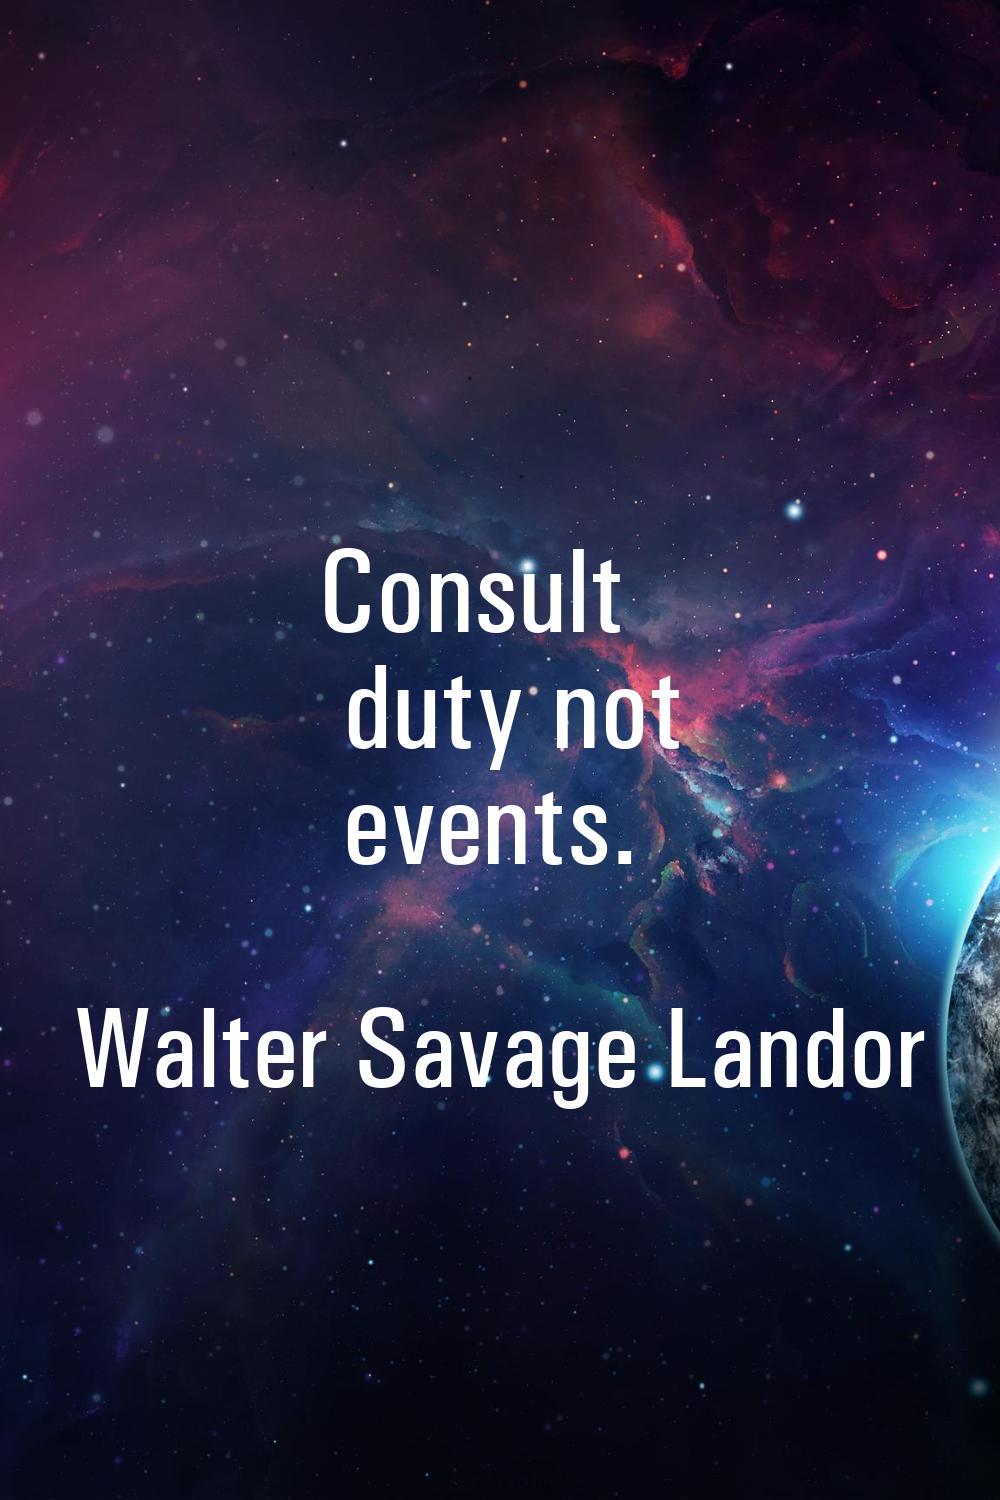 Consult duty not events.